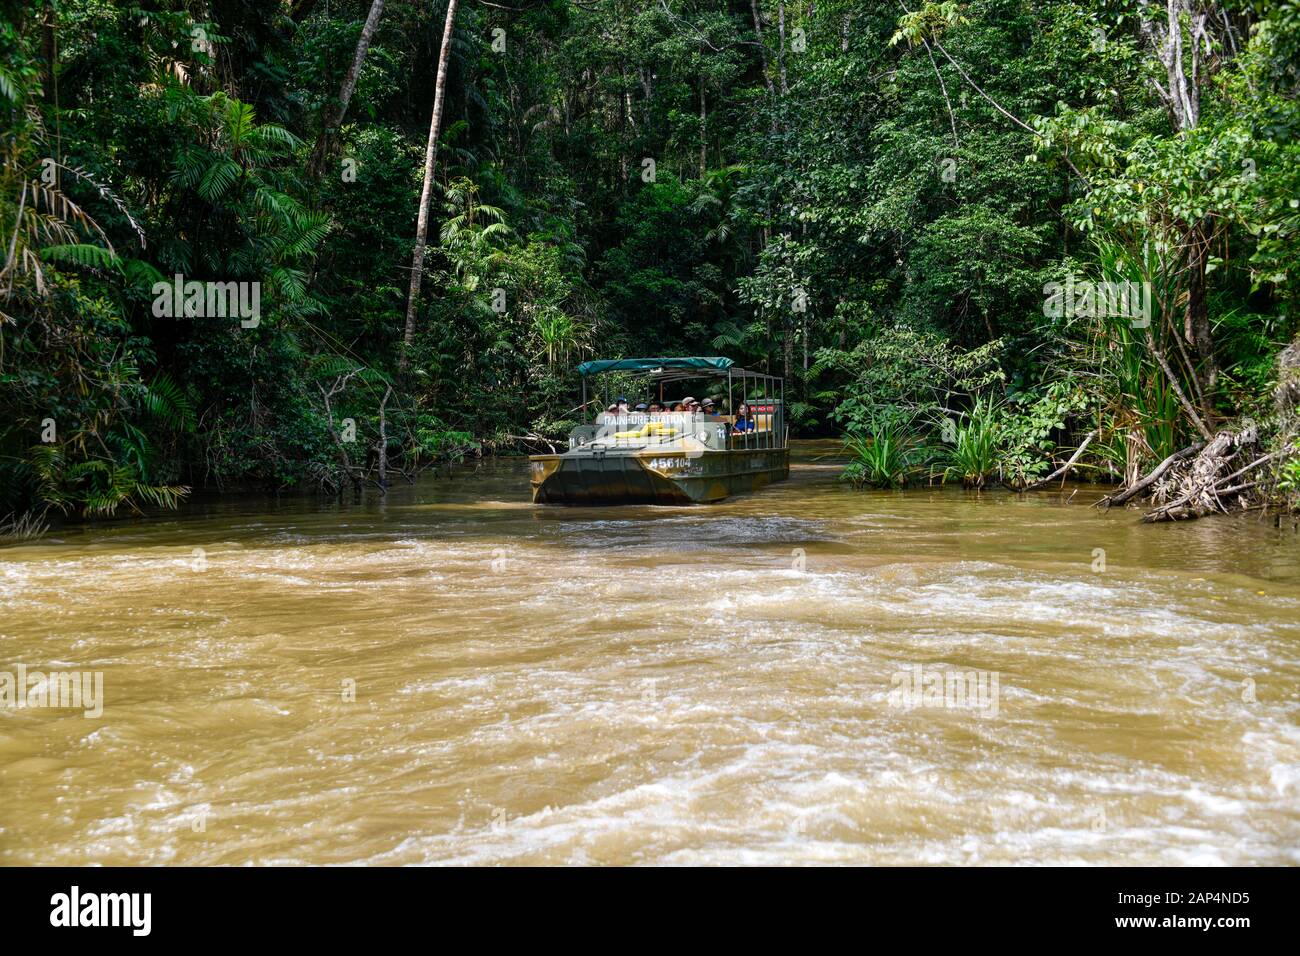 GMC Chevrolet DUKW six-wheel-drive amphibious vehicle on water with tourists in rainforest Stock Photo